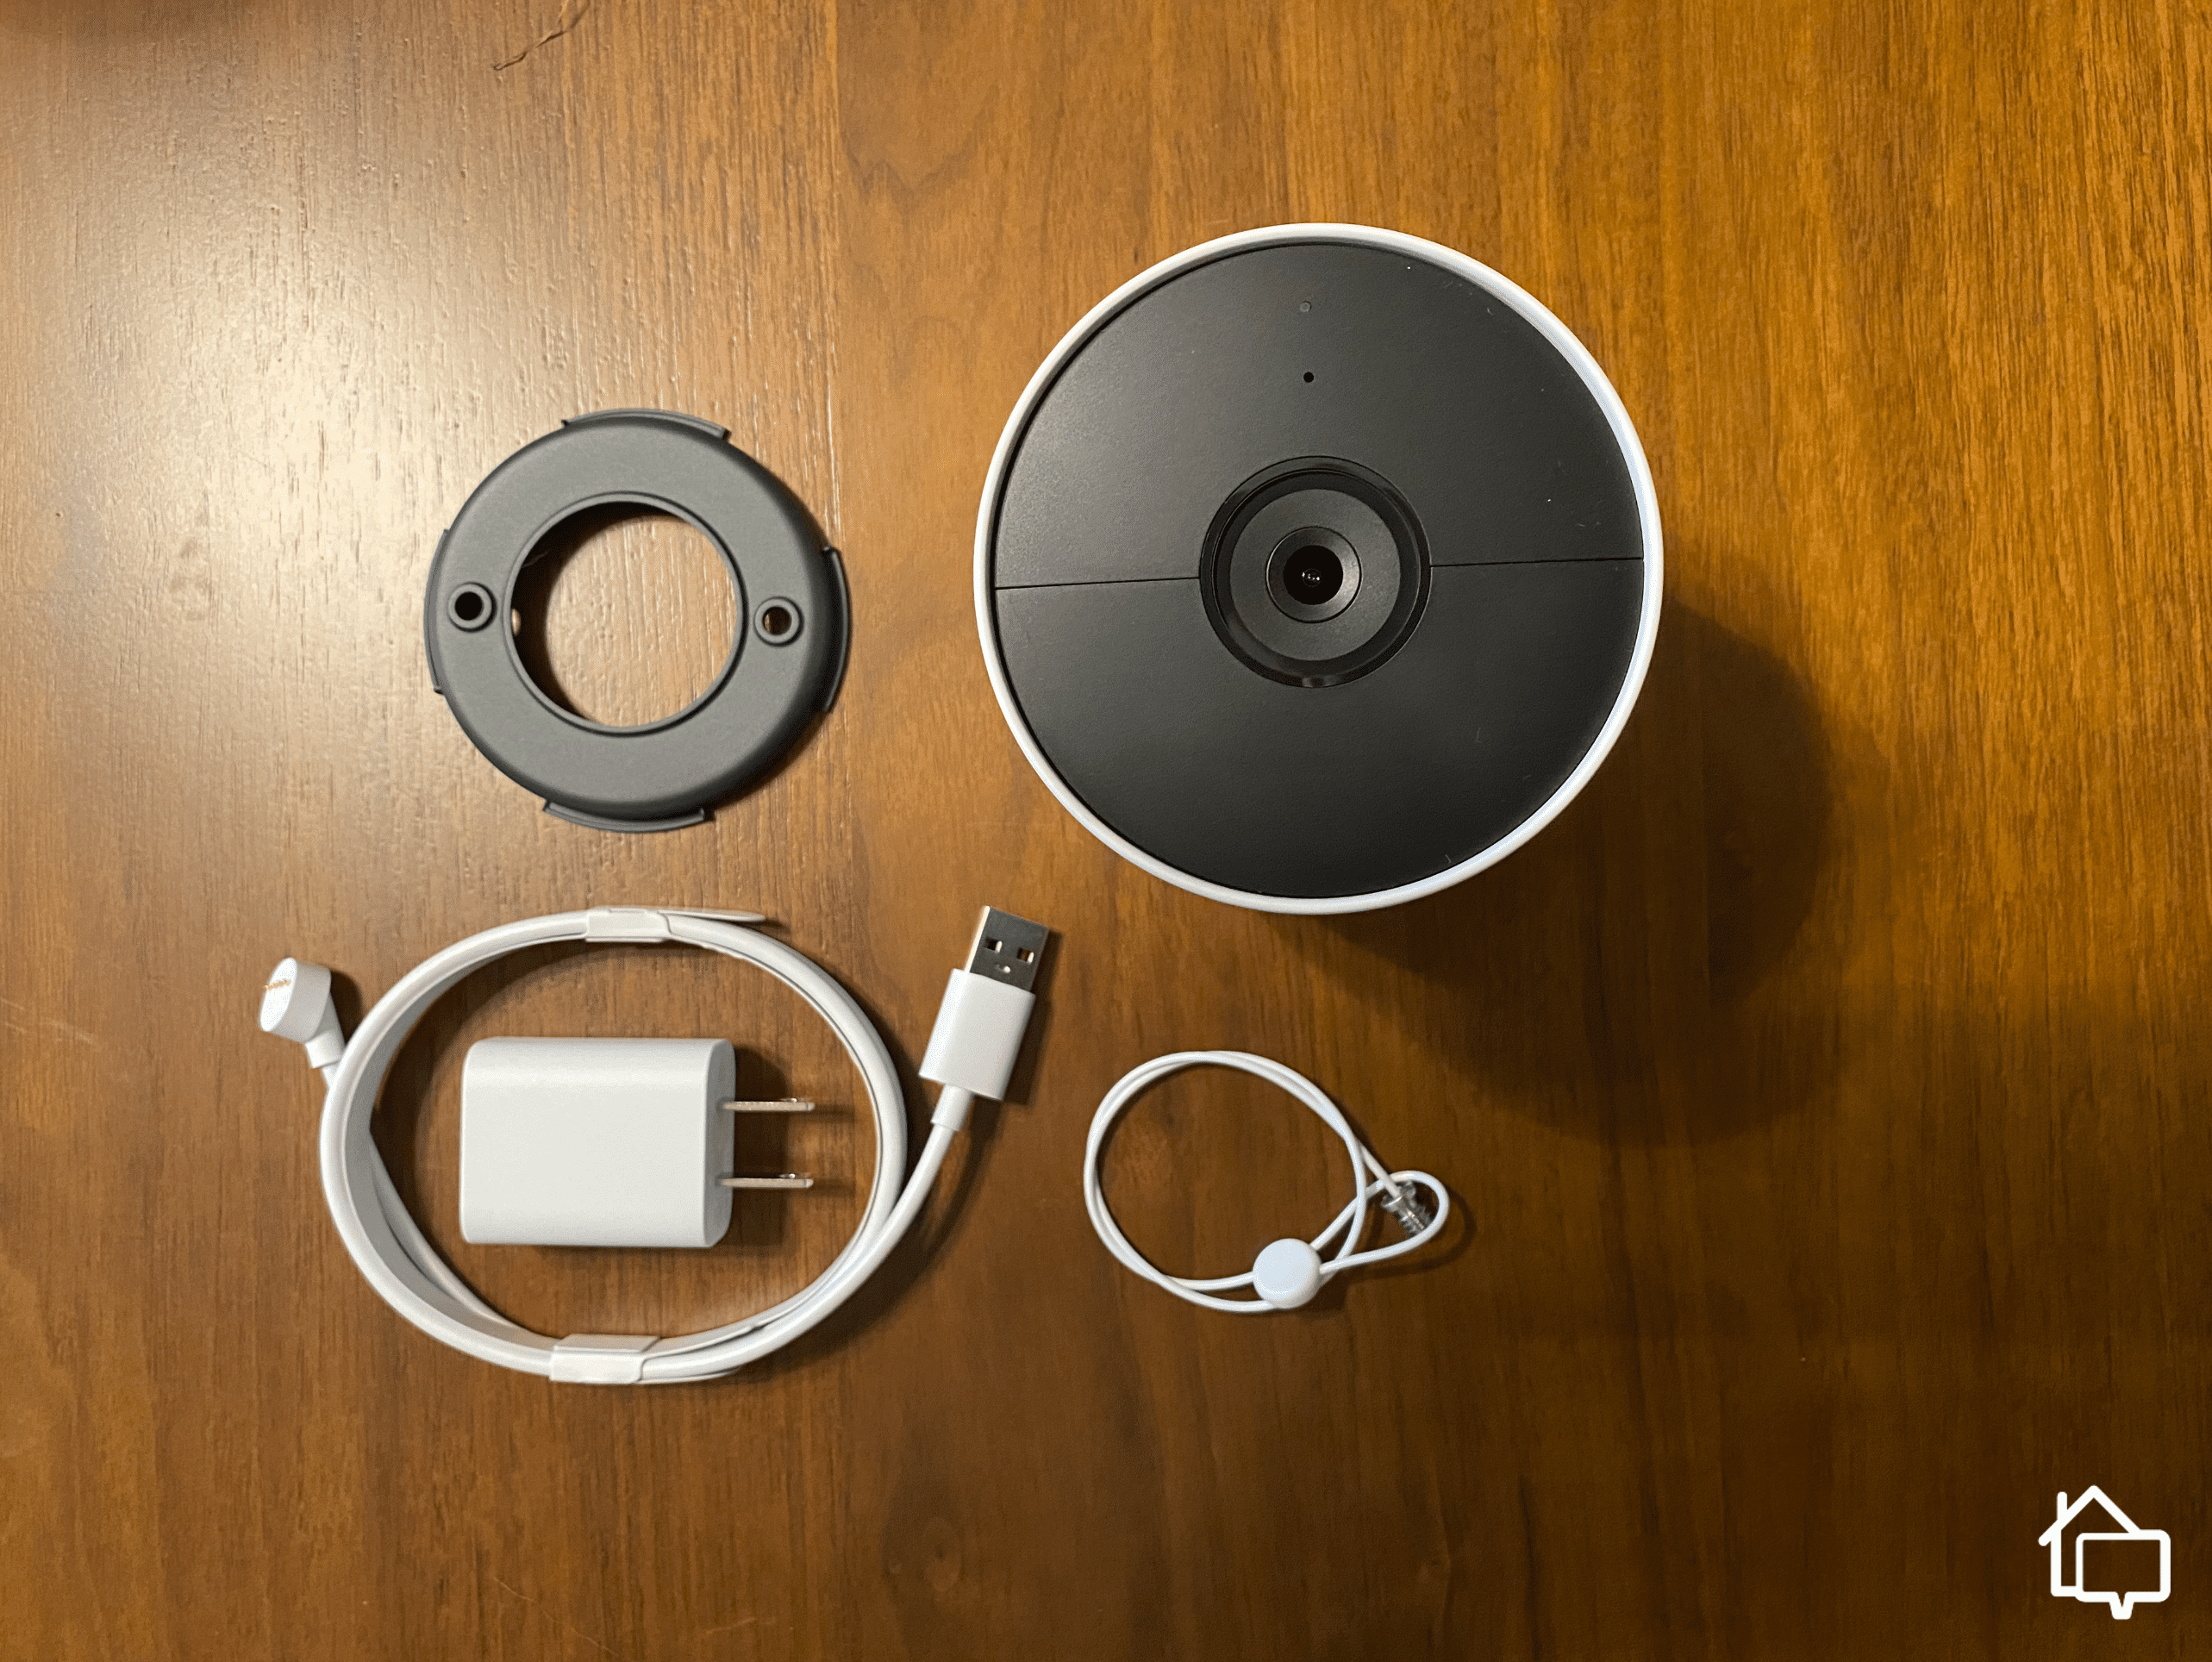 Everything included with the Nest Cam